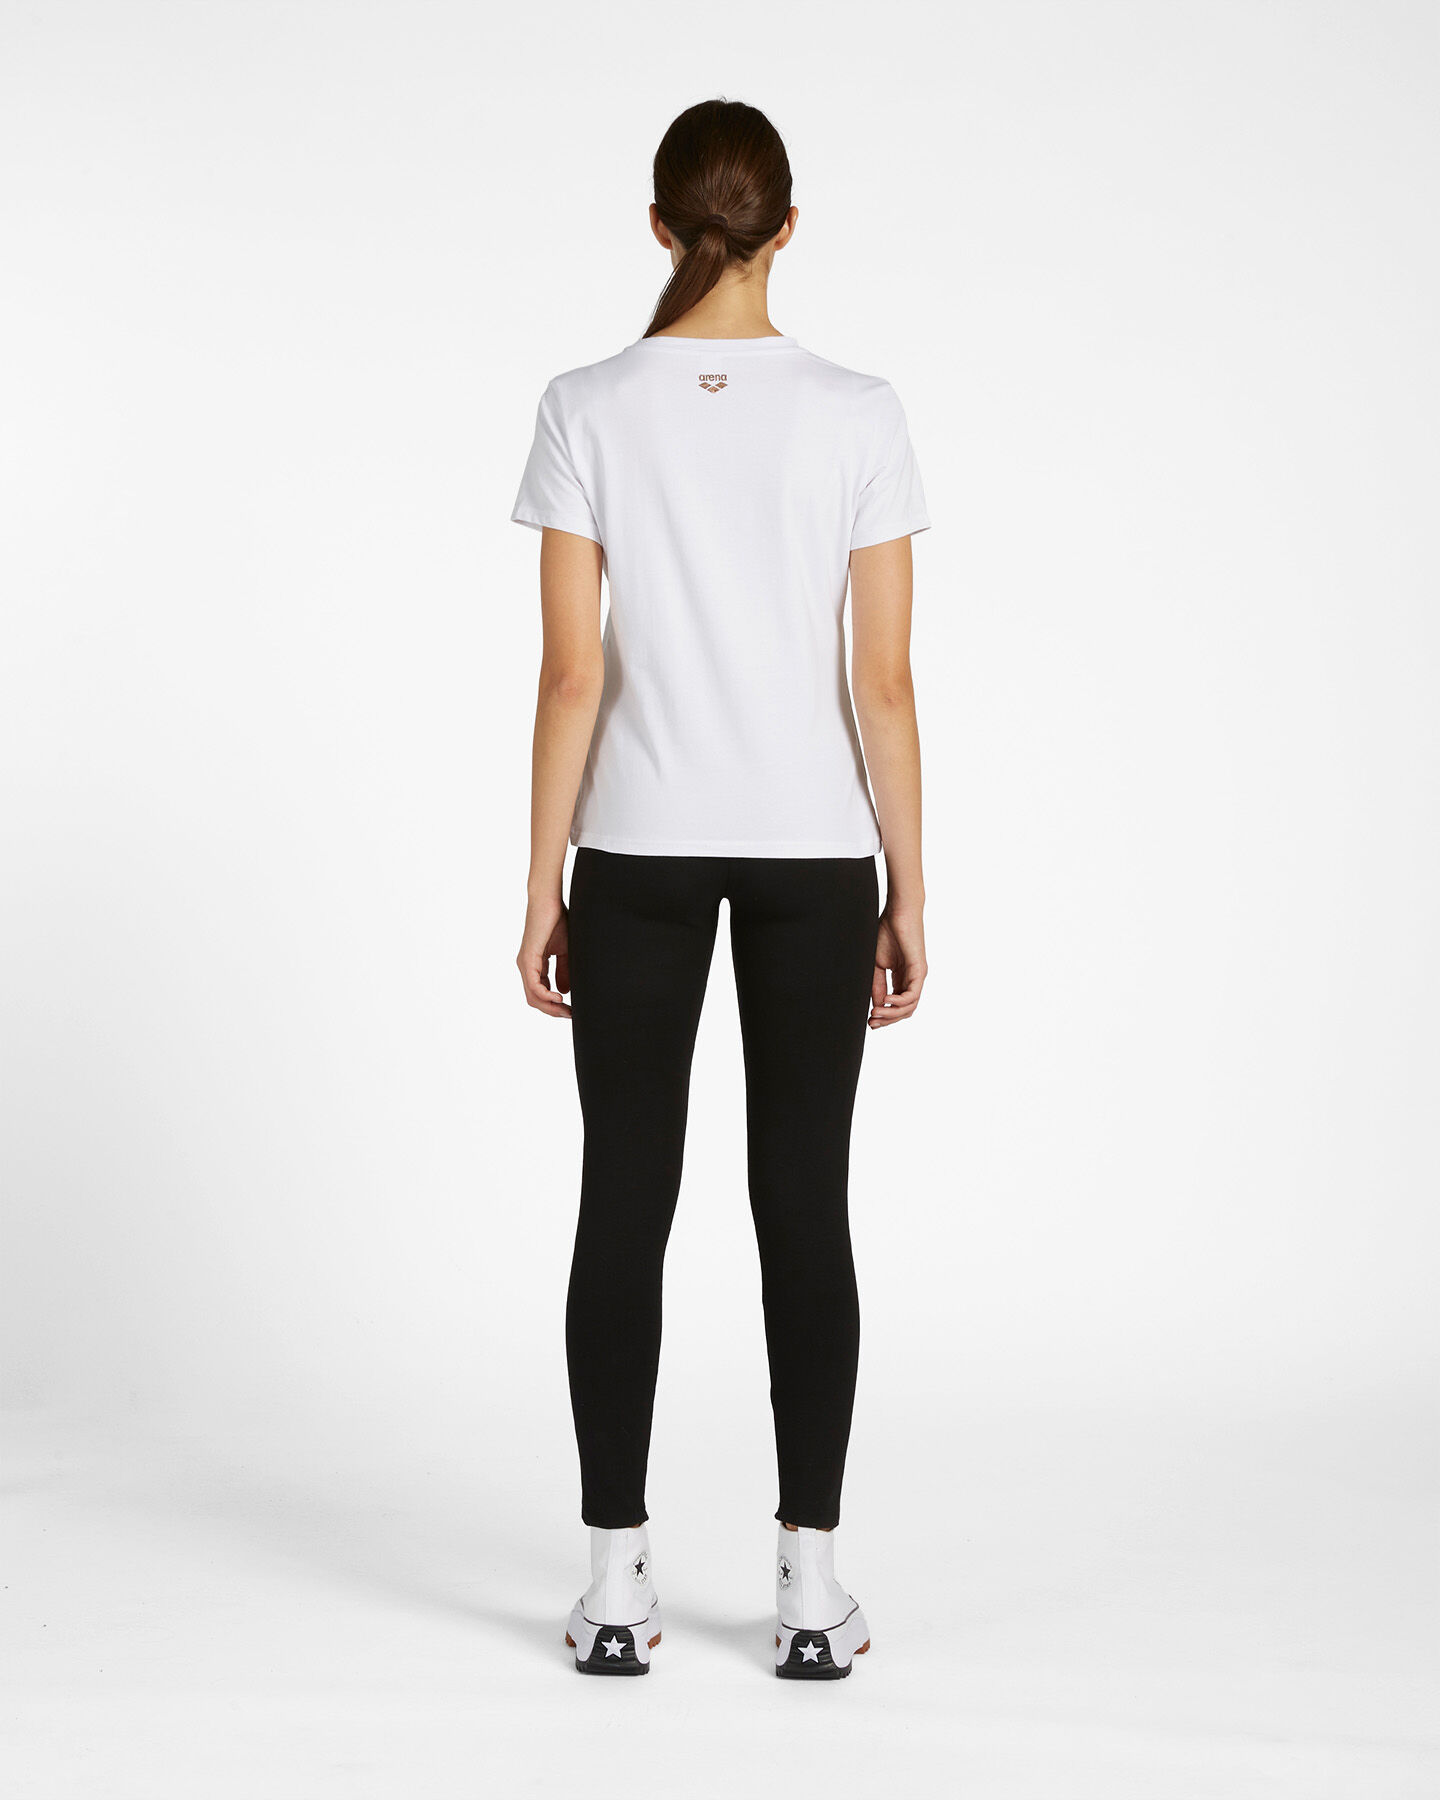  T-Shirt ARENA ATHLETIC W S4106243|001|S scatto 2